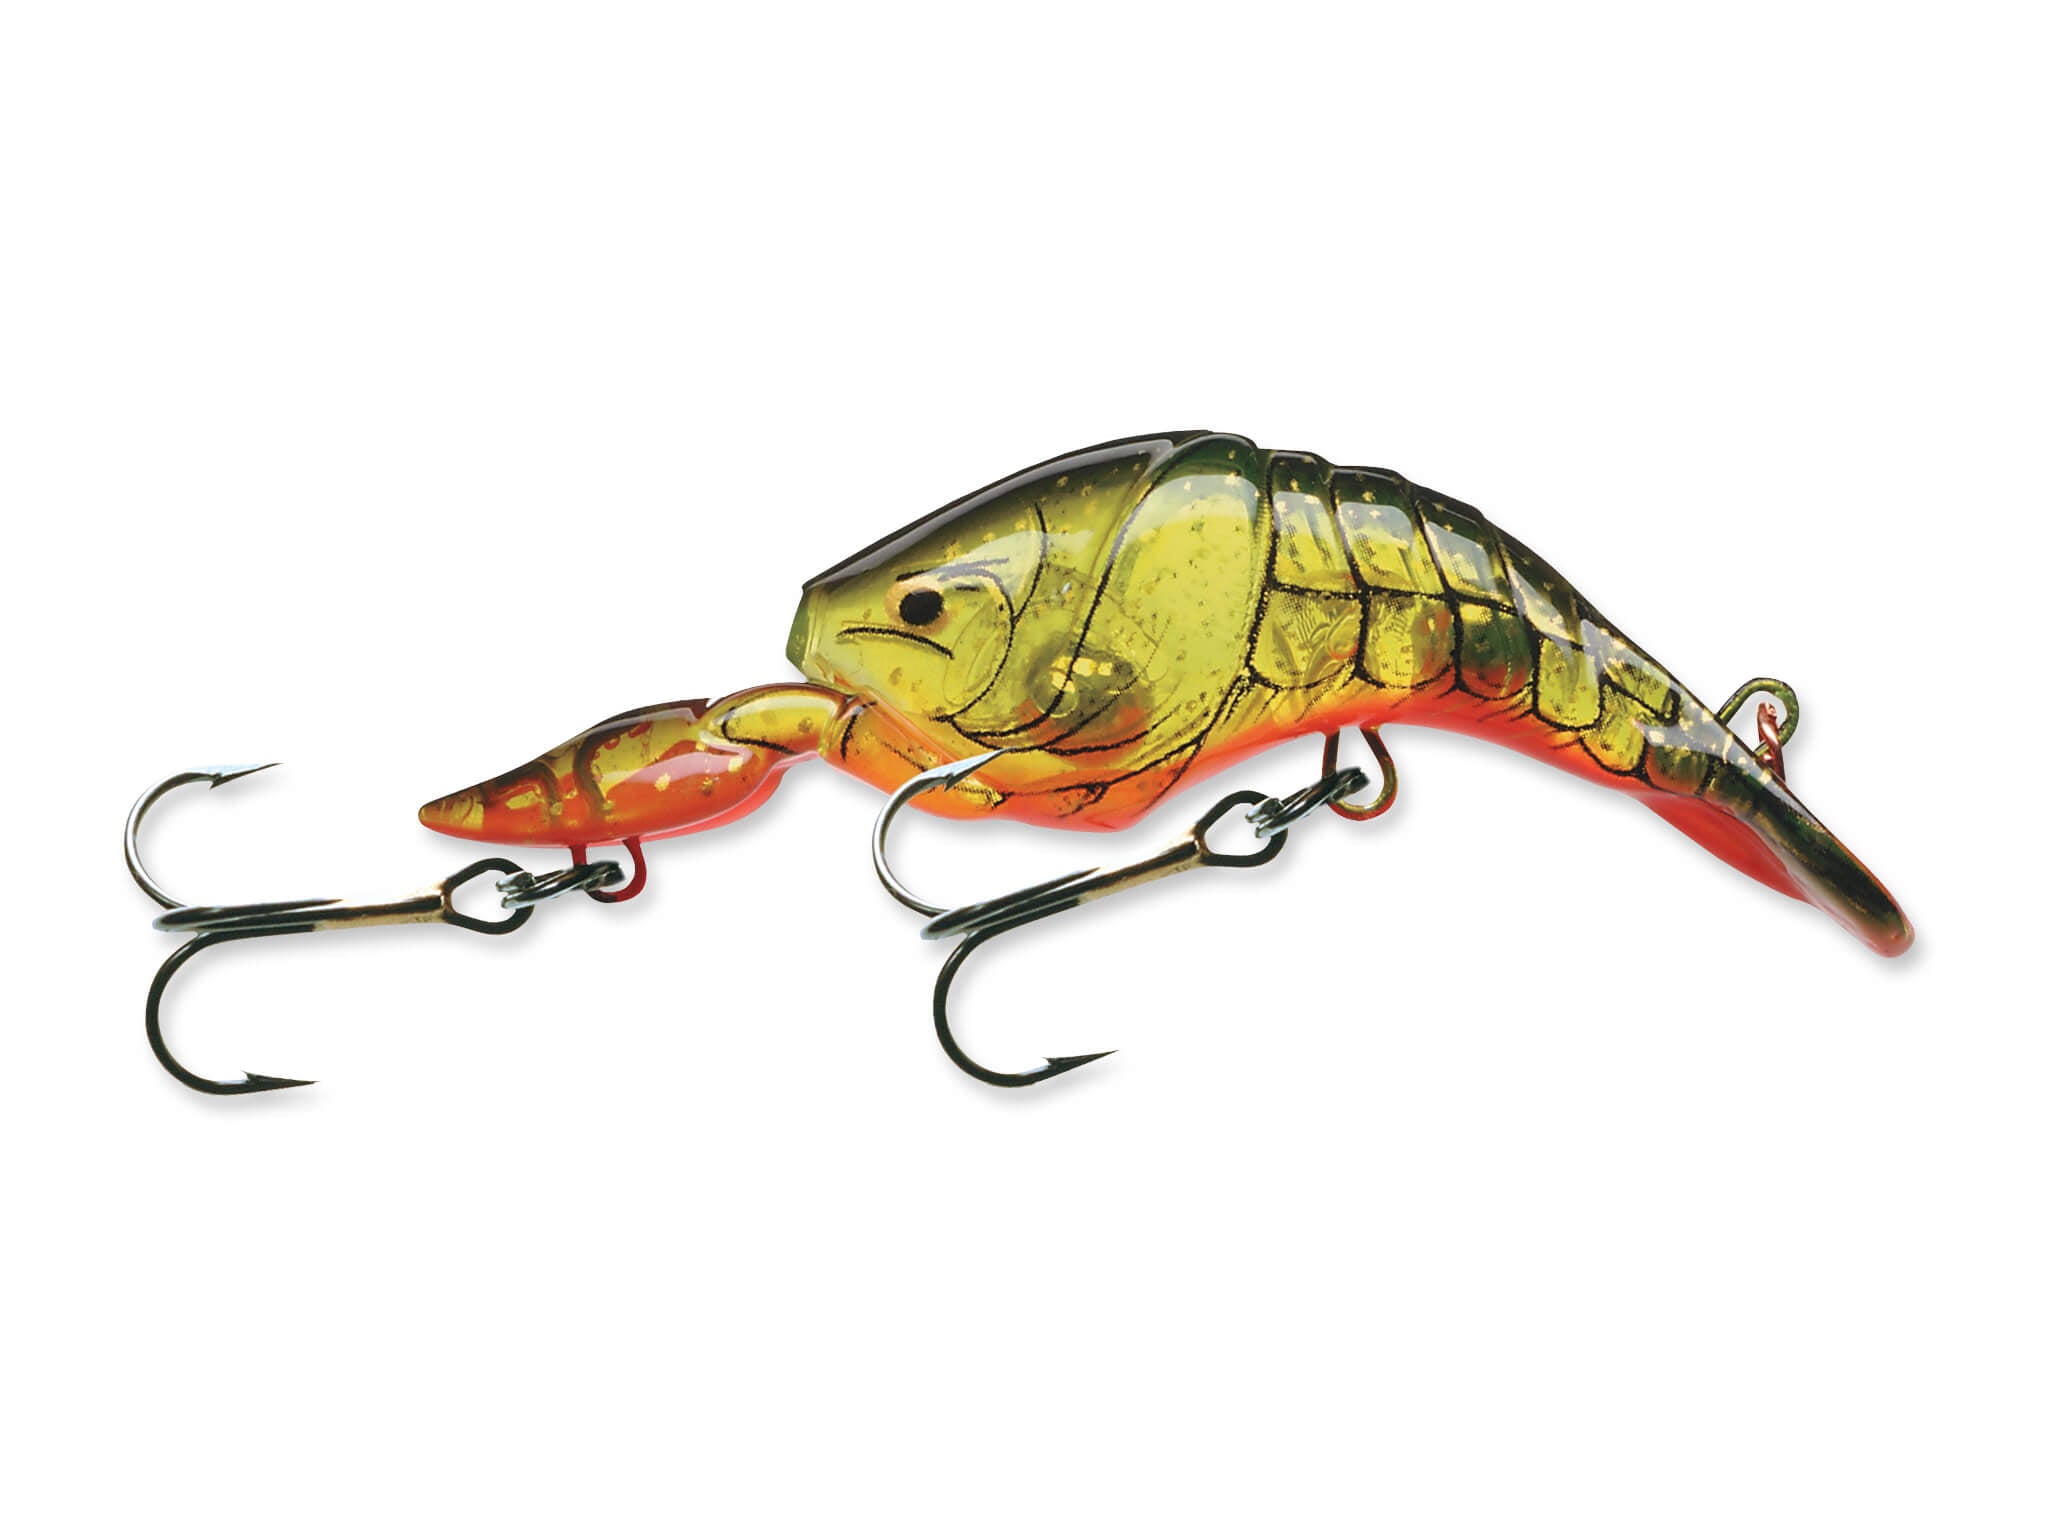 Storm ThunderCraw – Harpeth River Outfitters